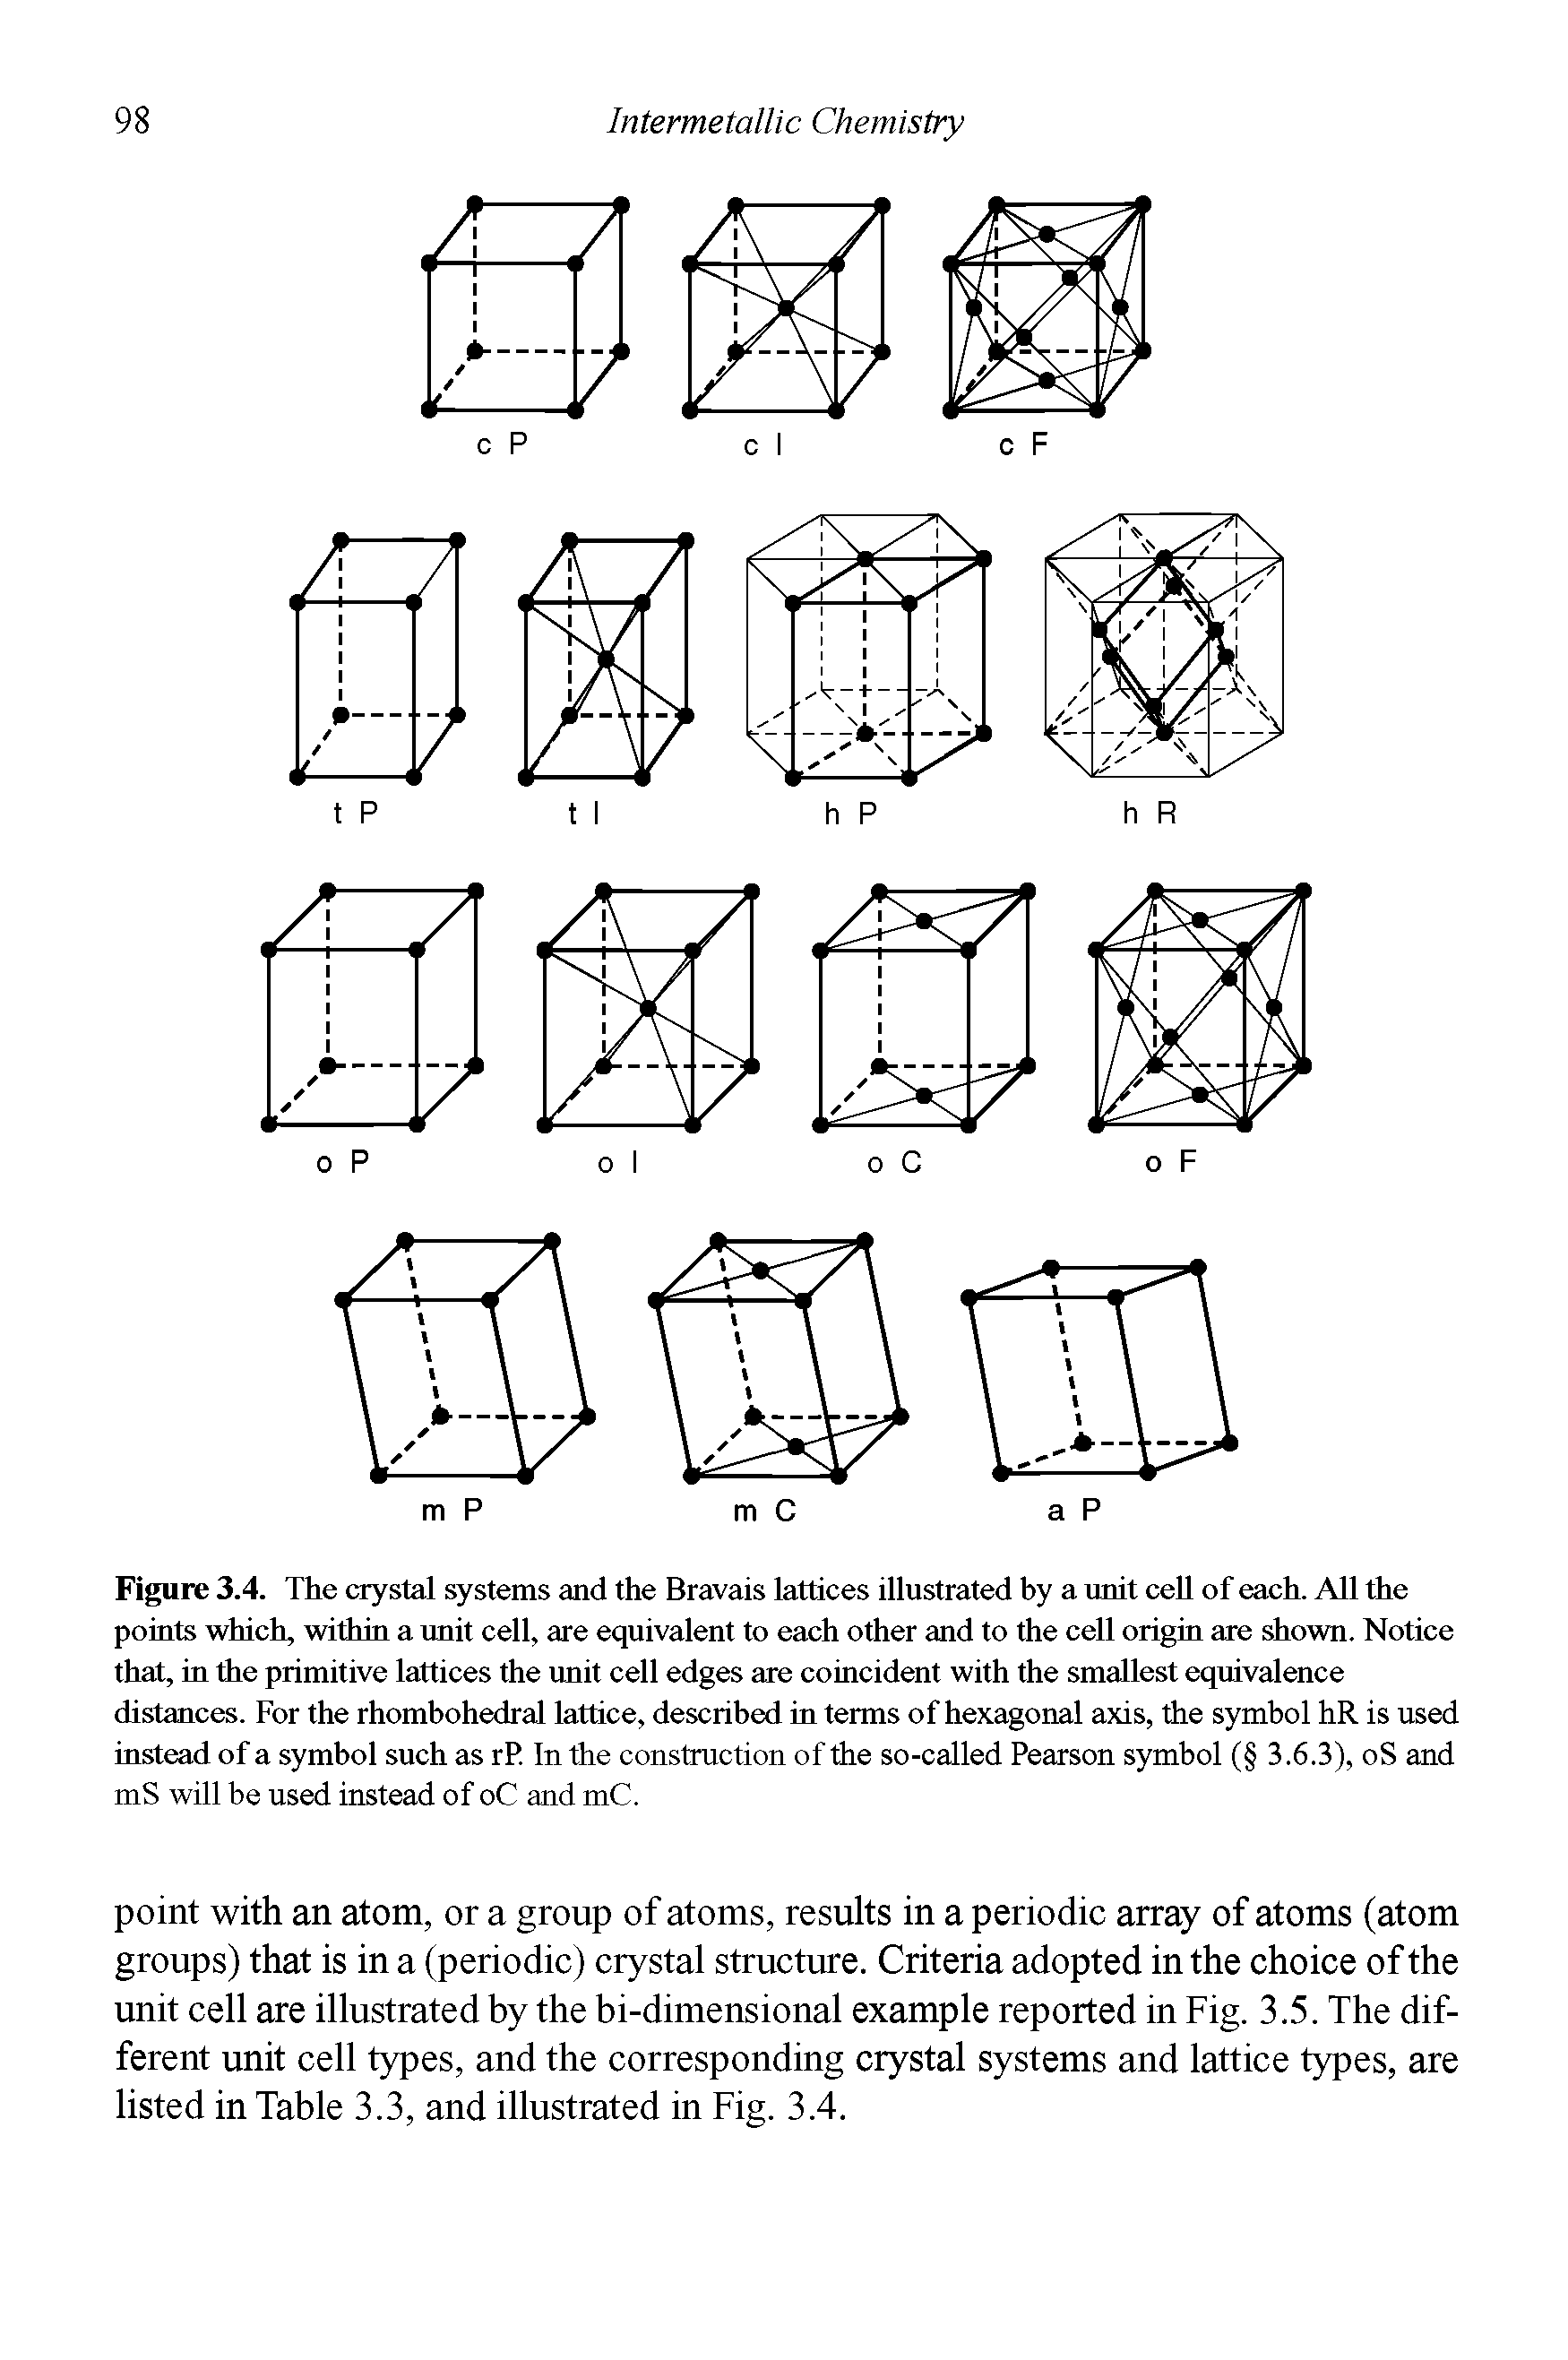 Figure 3.4. The crystal systems and the Bravais lattices illustrated by a unit cell of each. All the points which, within a unit cell, are equivalent to each other and to the cell origin are shown. Notice that, in the primitive lattices the unit cell edges are coincident with the smallest equivalence distances. For the rhombohedral lattice, described in terms of hexagonal axis, the symbol hR is used instead of a symbol such as rP. In the construction of the so-called Pearson symbol ( 3.6.3), oS and mS will be used instead of oC and mC.